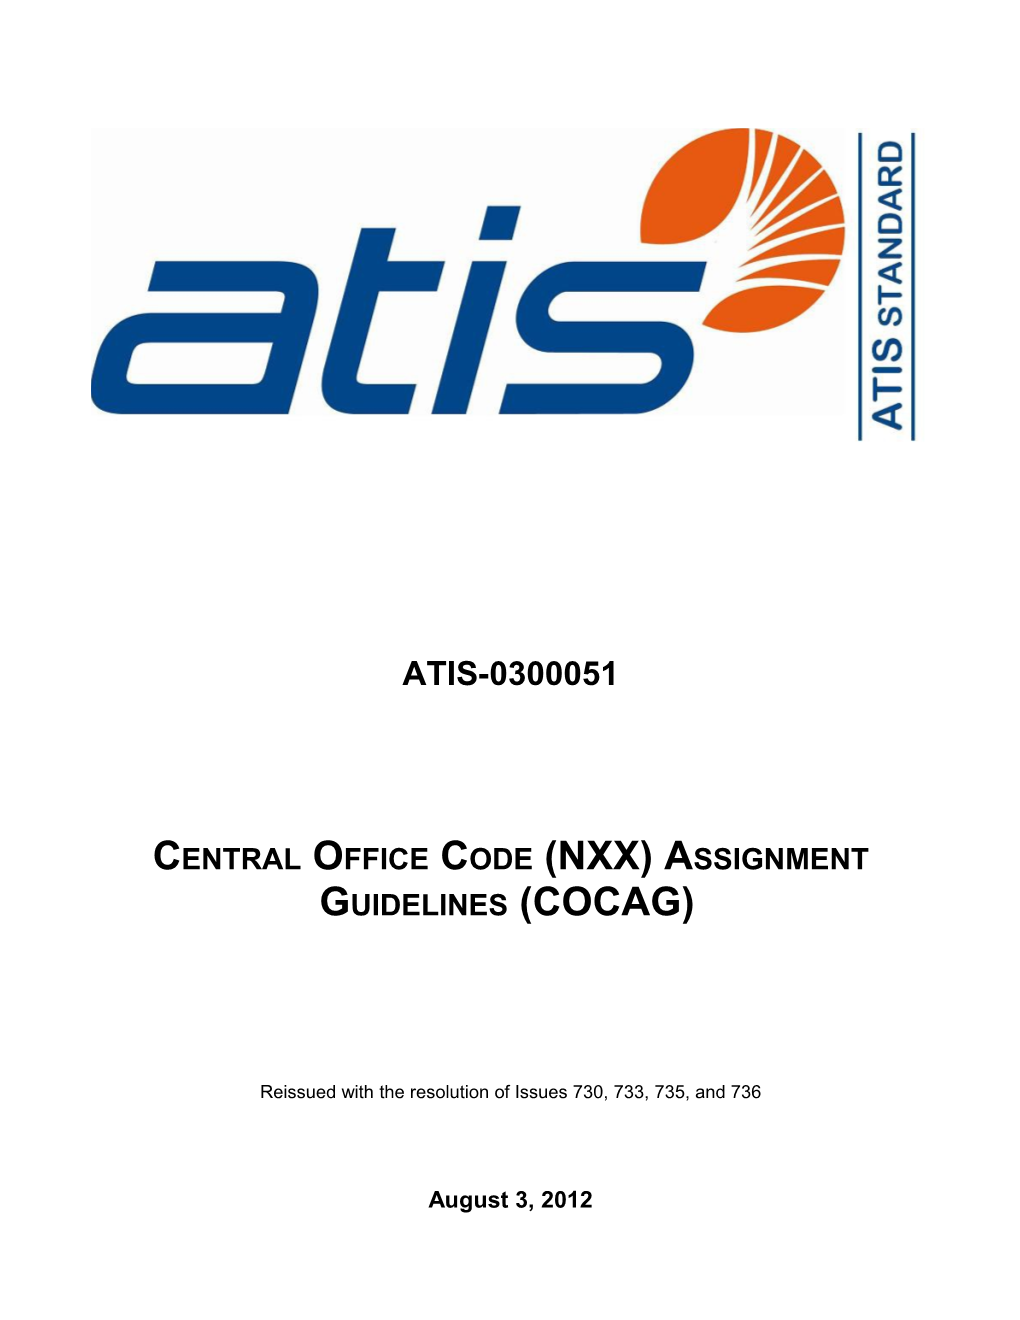 Central Office Code (NXX) Assignment Guidelines (COCAG)